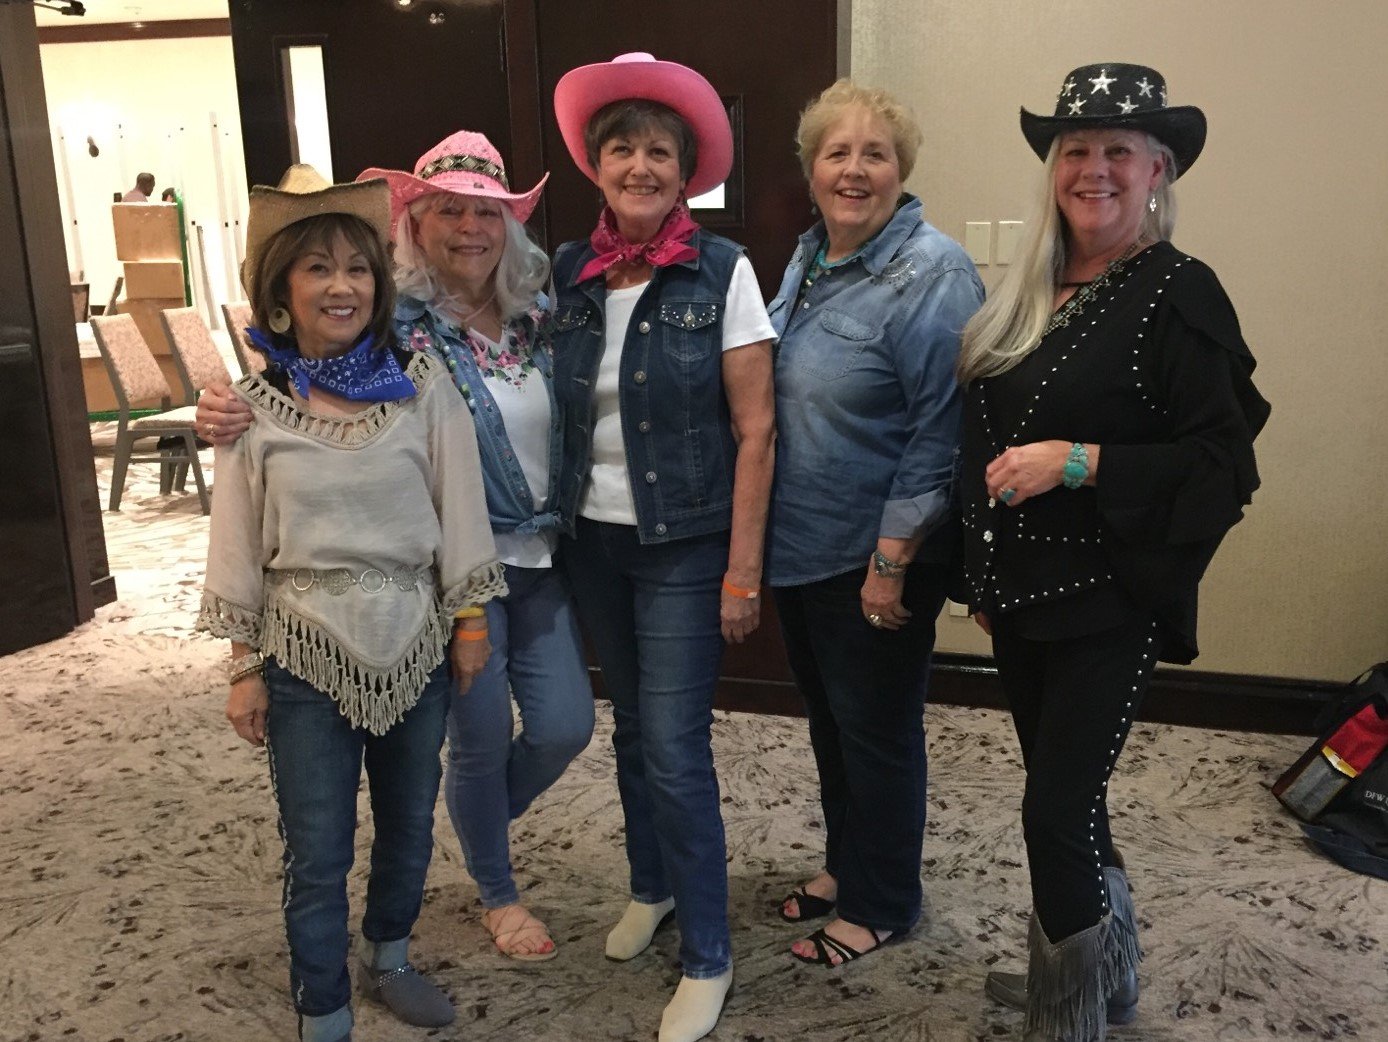 Cowgirls at Heart of Texas event